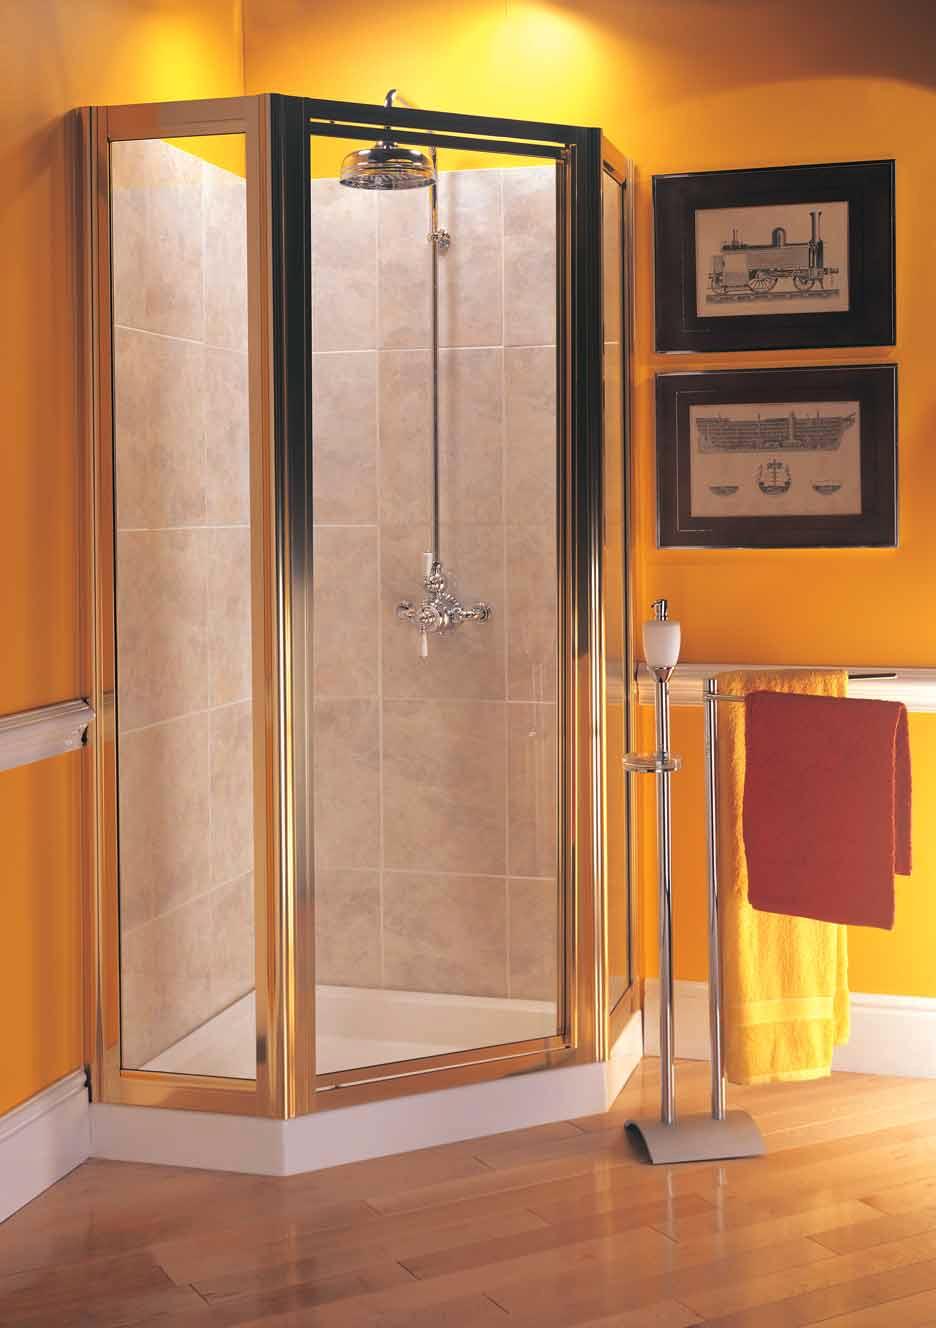 The Supreme Pentagon Enclosure created to enhance the shower area.